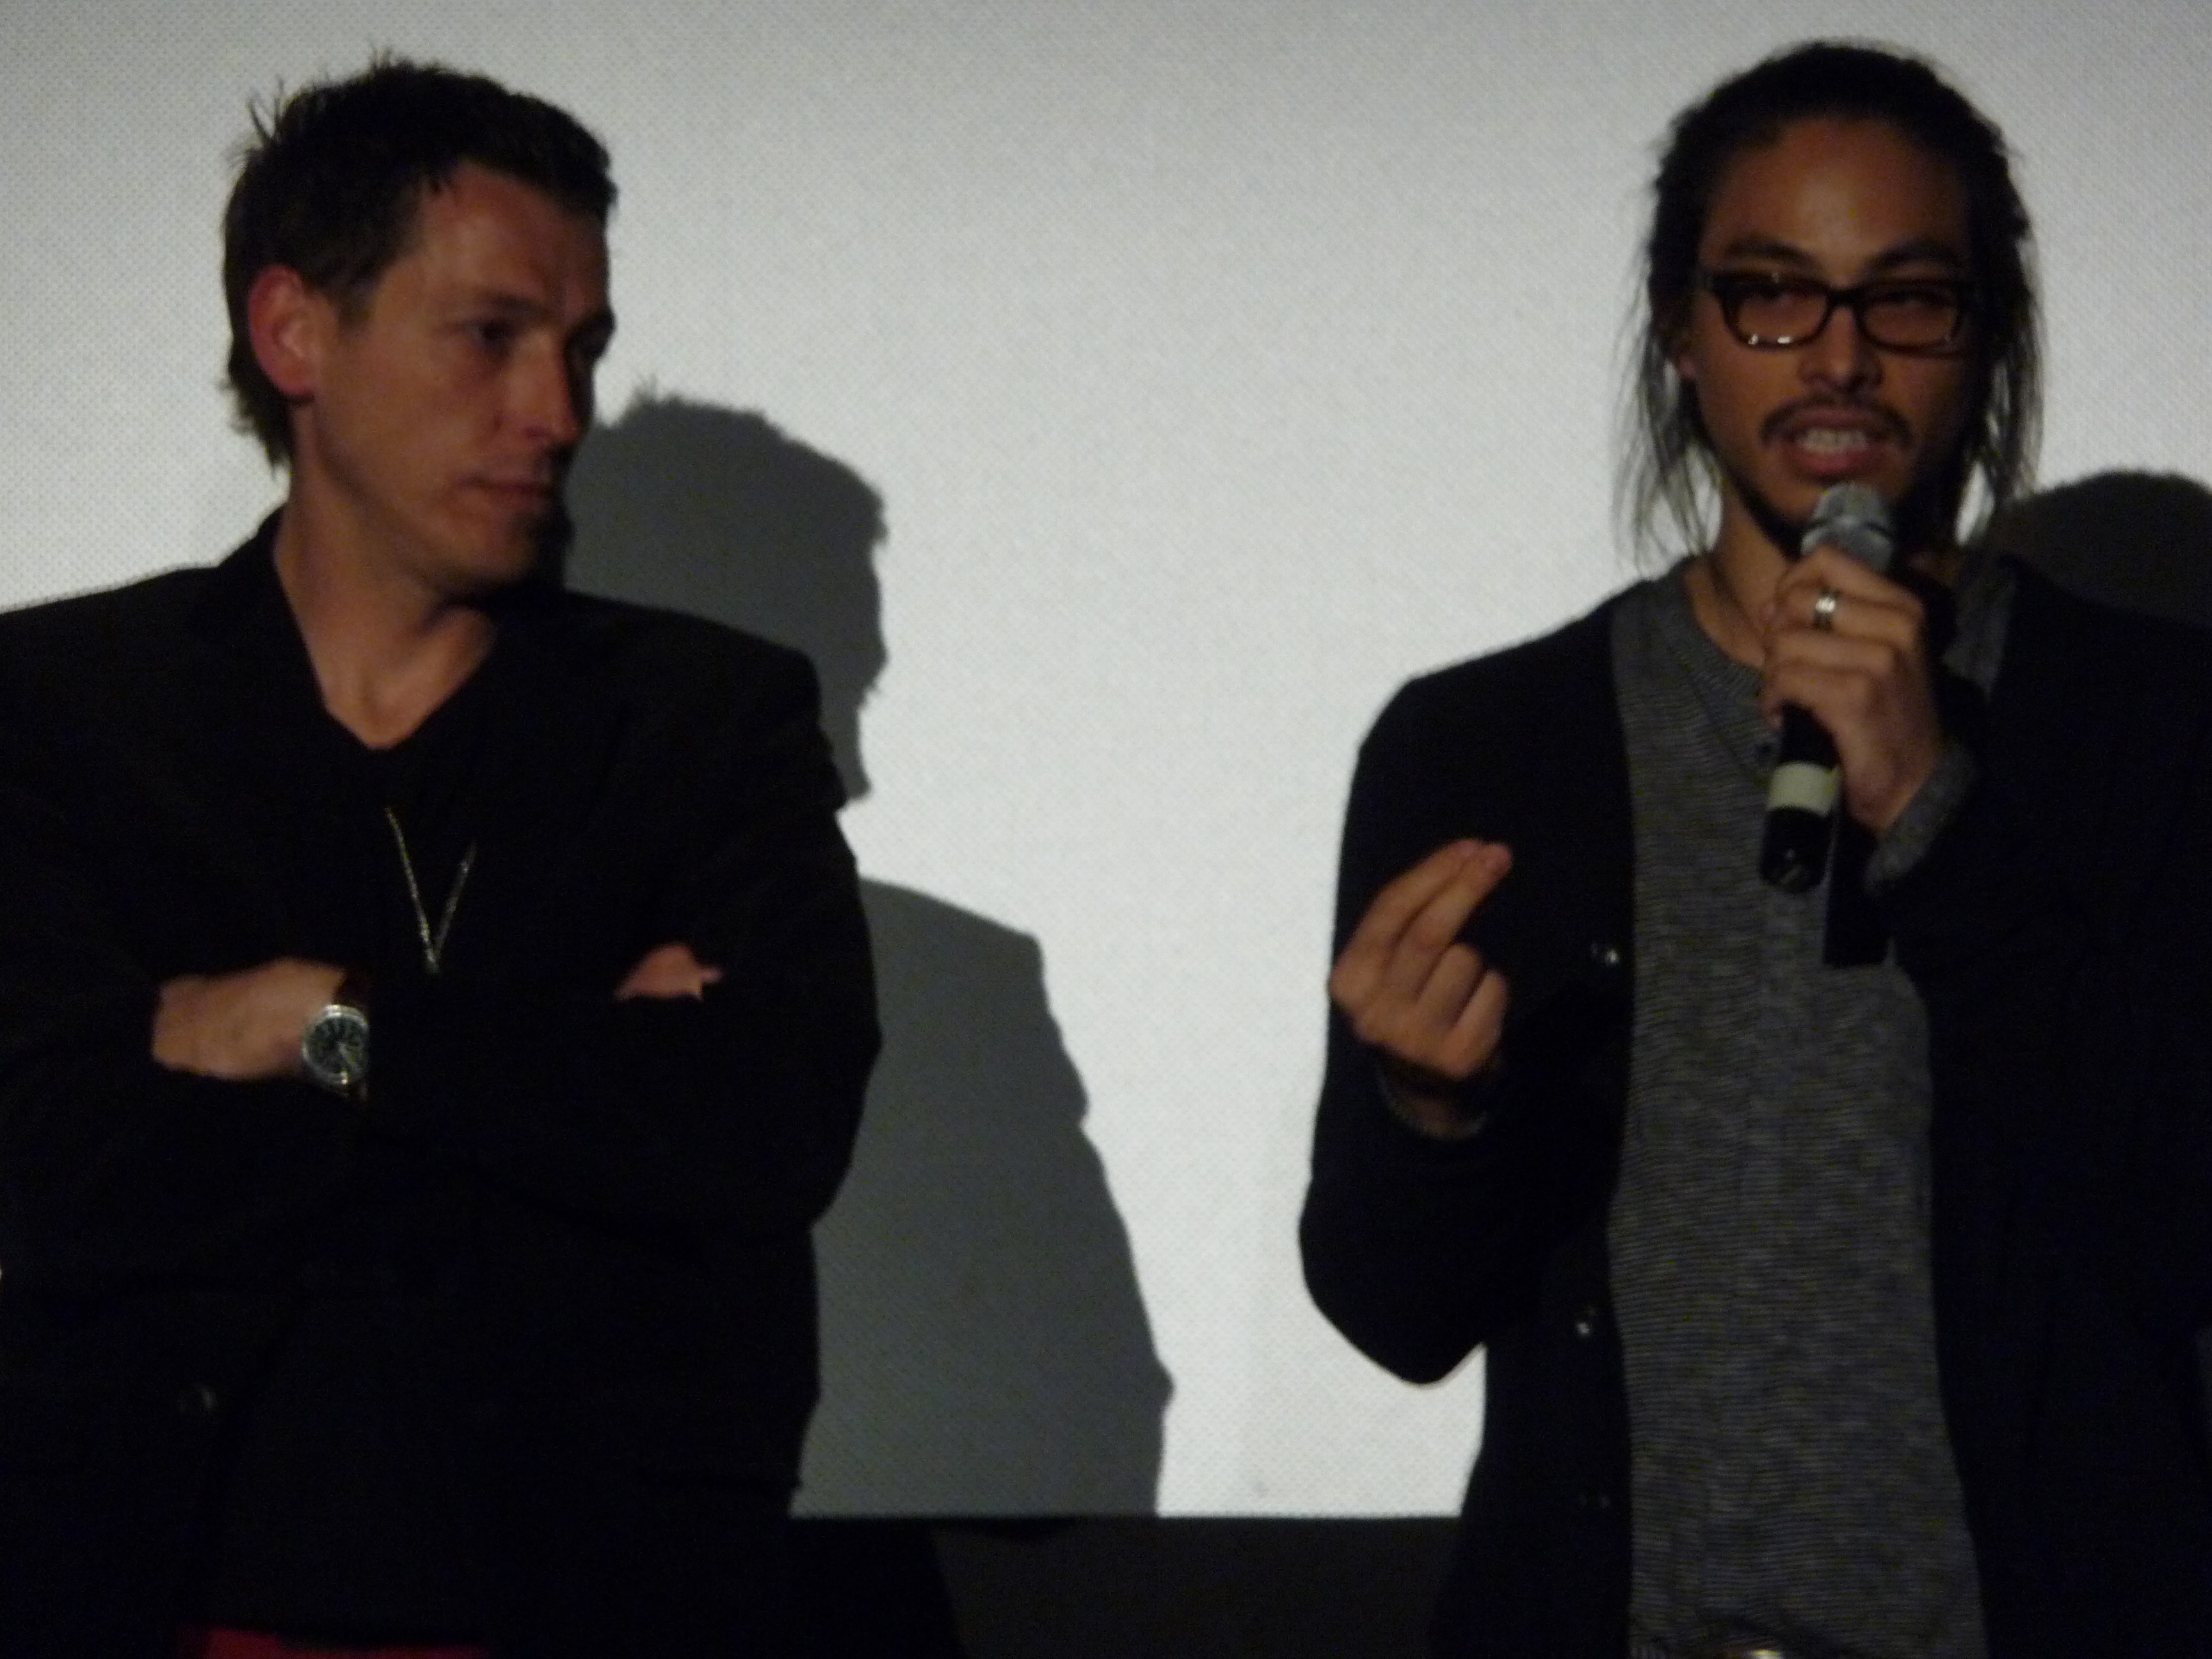 Actor Trent McMullen and Director Kim Chapiron answer questions during a Q&A for their film 'Dog Pound' at the 2010 Tribeca Film Festival.